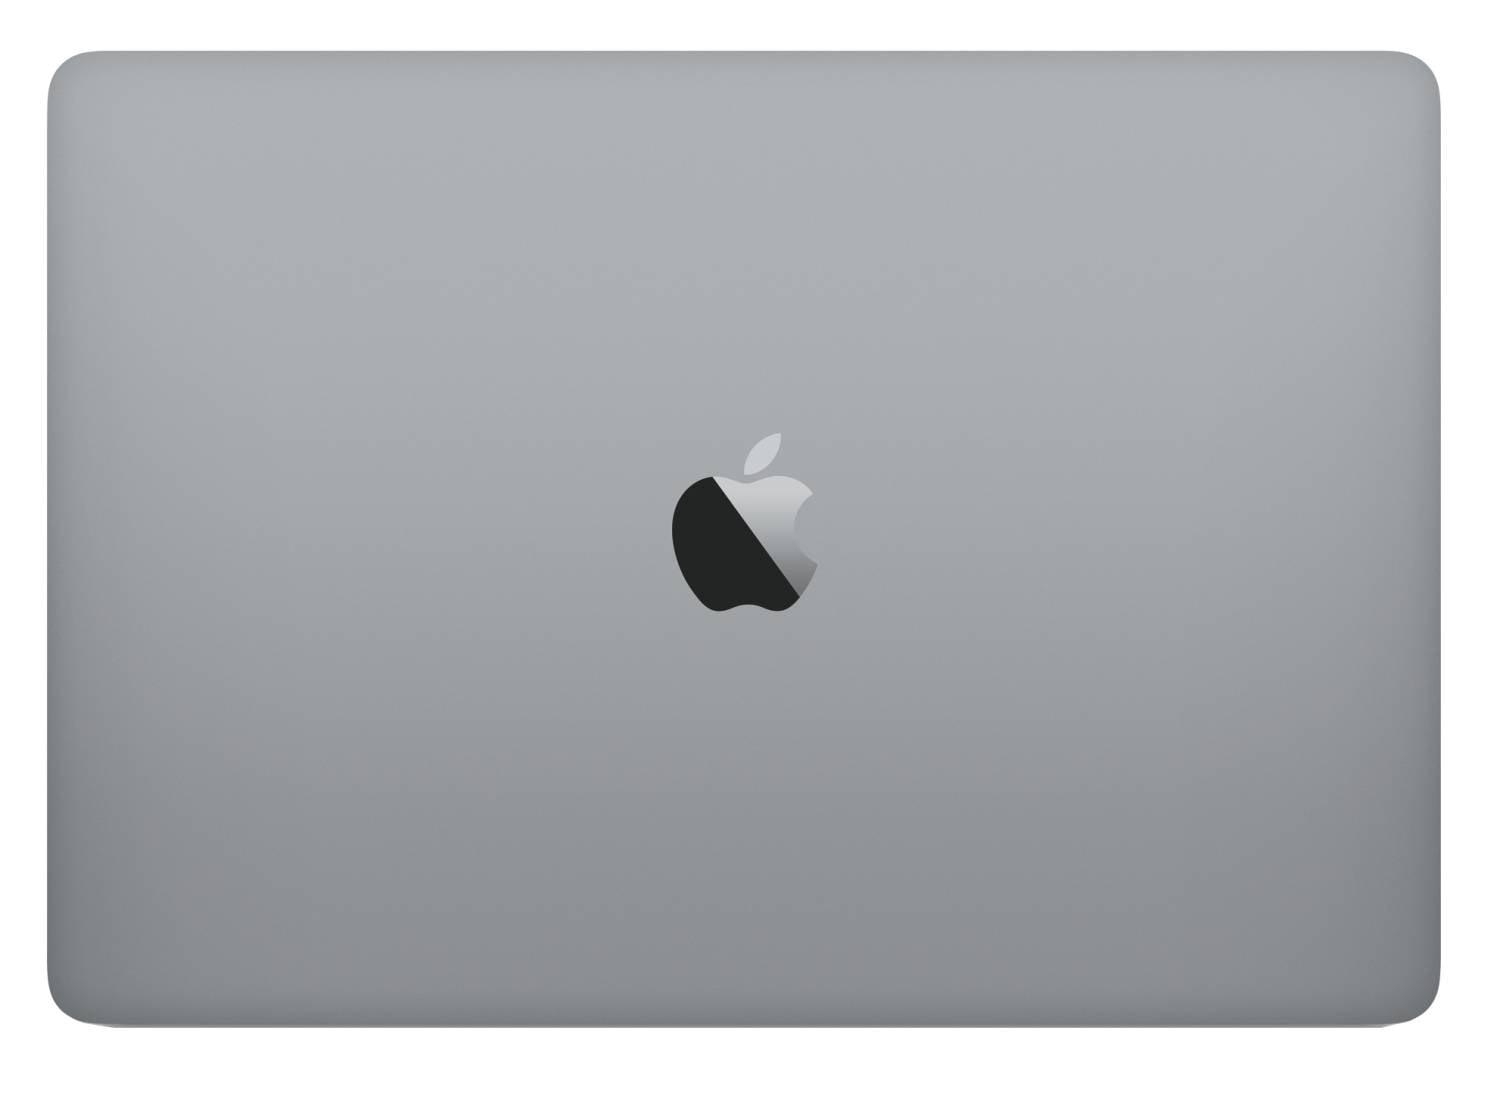 Apple MacBook Pro 15 Certified Refurbished Intel Core i7 2.9GHz Touch Bar  16 GB Memory 512GB SSD (2017) Space Gray MPTT2LL/A - Best Buy